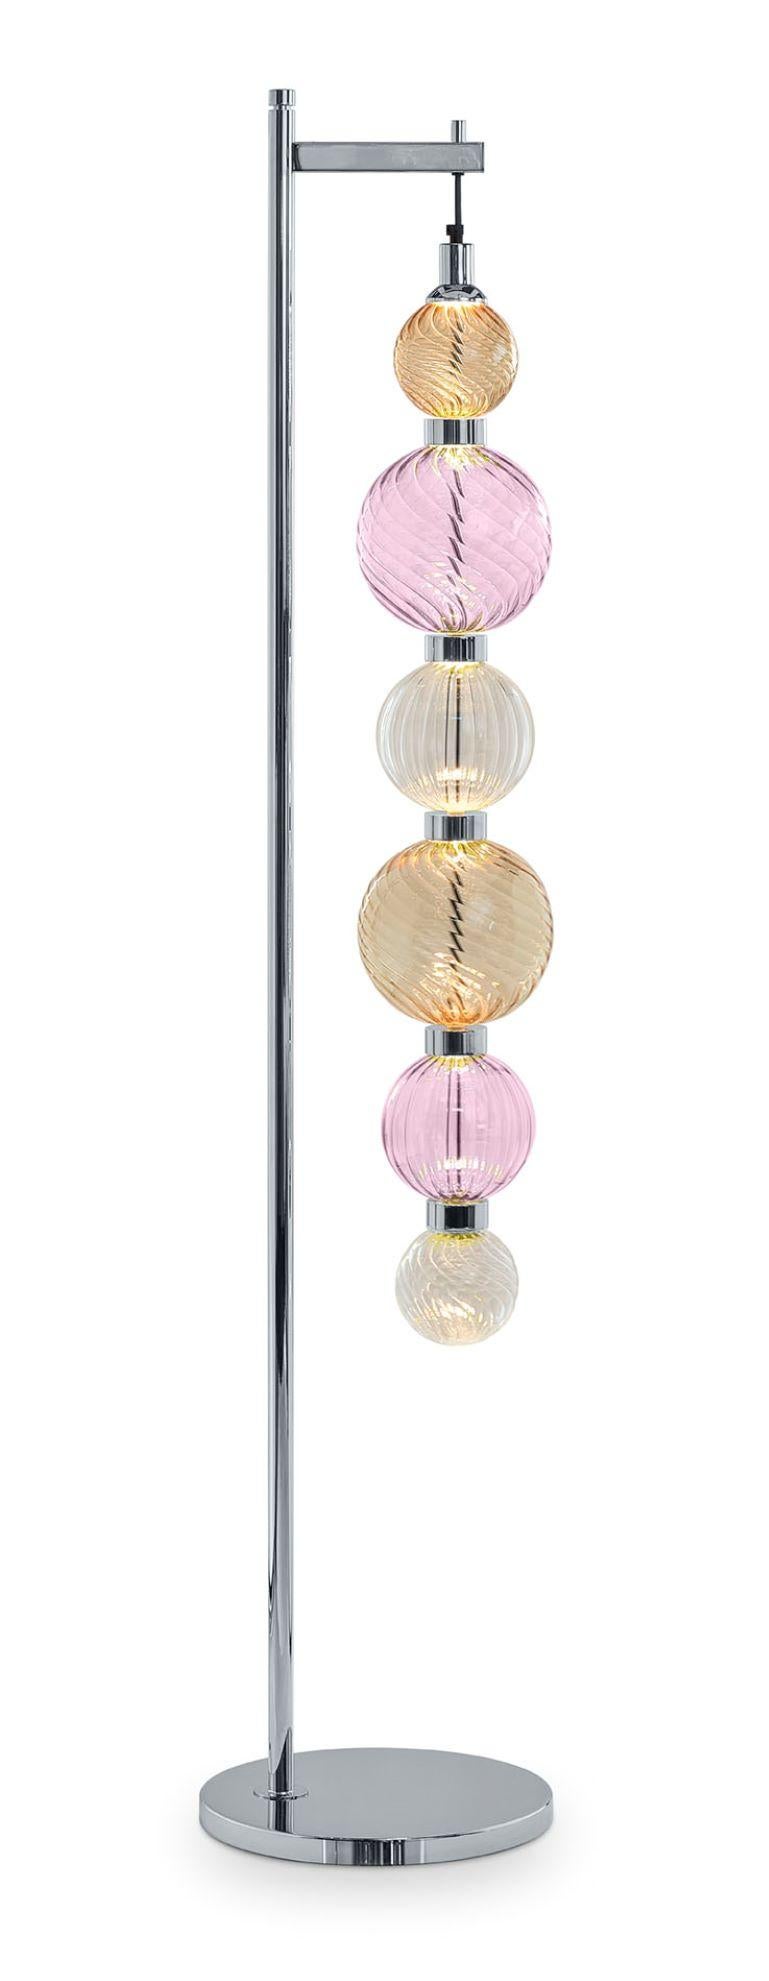 Contemporary Floor Lamp Polished Champagne or Chrome Finish Murano Glass Spheres Customizable For Sale